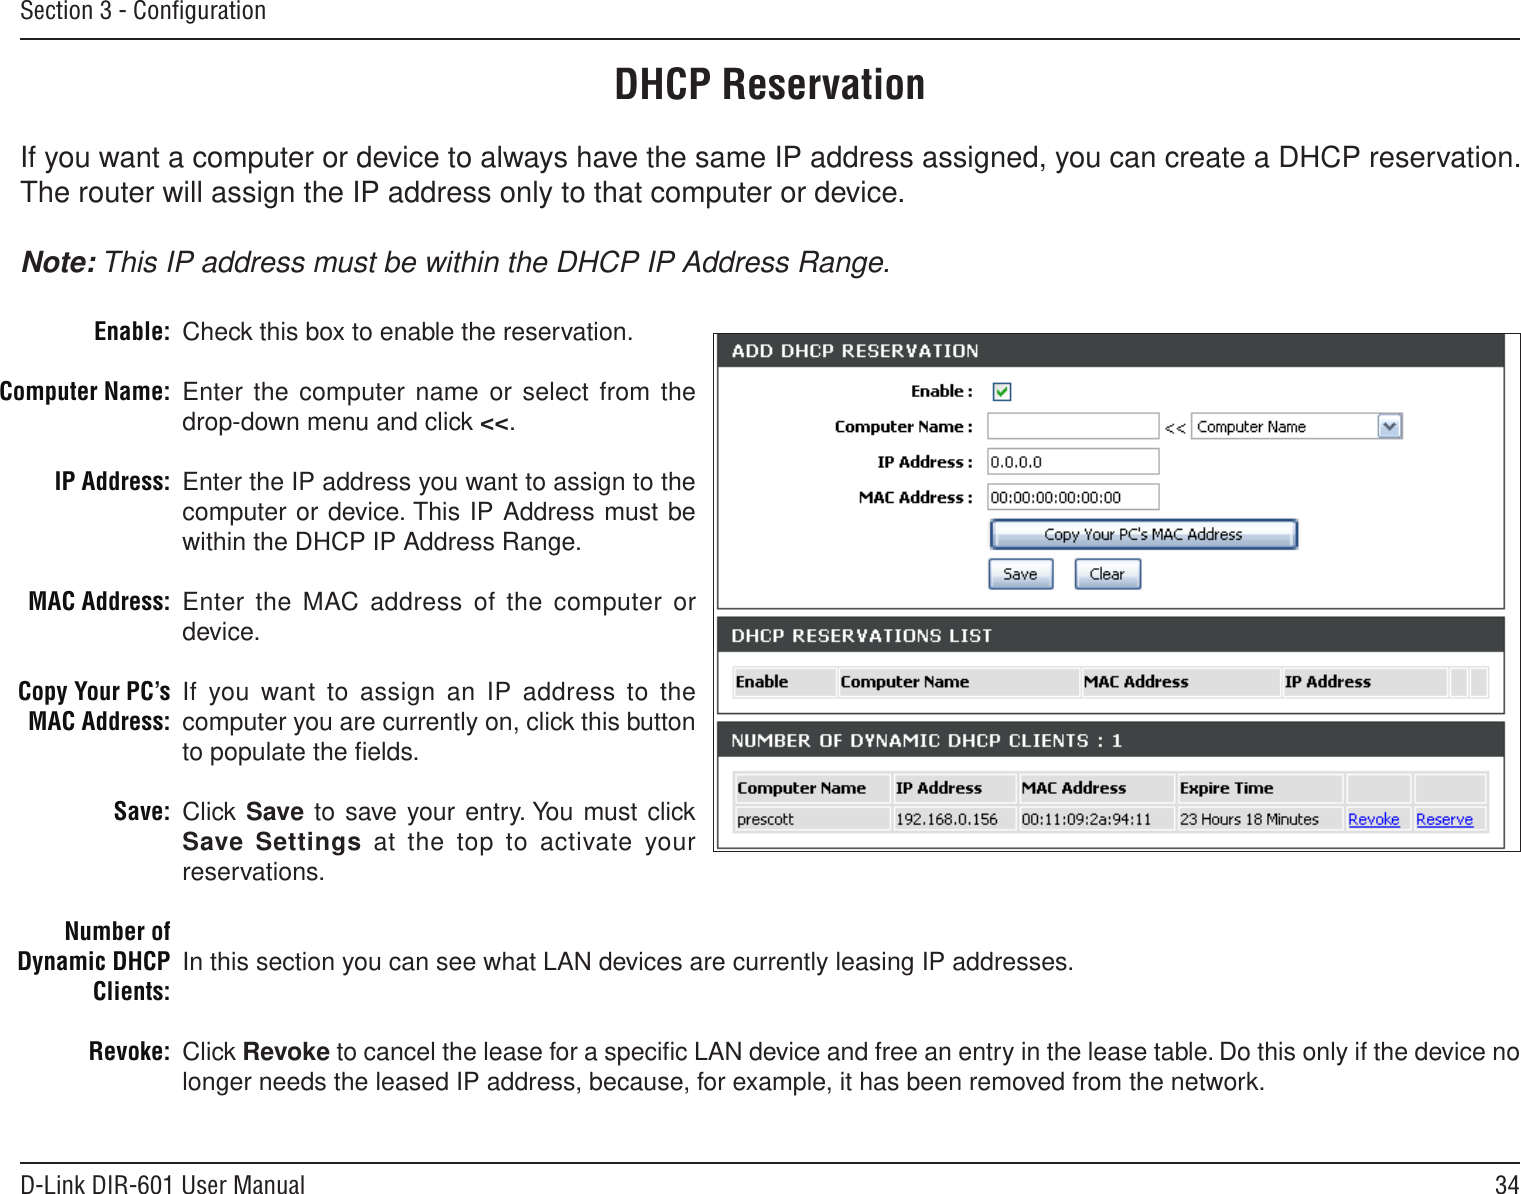 34D-Link DIR-601 User ManualSection 3 - ConﬁgurationDHCP ReservationIf you want a computer or device to always have the same IP address assigned, you can create a DHCP reservation. The router will assign the IP address only to that computer or device. Note: This IP address must be within the DHCP IP Address Range.Check this box to enable the reservation.Enter the computer name or  select from the drop-down menu and click &lt;&lt;.Enter the IP address you want to assign to the computer or device. This IP Address must be within the DHCP IP Address Range.Enter the MAC address of  the computer or device.If you want to assign an  IP address to the computer you are currently on, click this button to populate the ﬁelds. Click Save to save your entry. You must click Save Settings  at  the top to activate your reservations. In this section you can see what LAN devices are currently leasing IP addresses.Click Revoke to cancel the lease for a speciﬁc LAN device and free an entry in the lease table. Do this only if the device no longer needs the leased IP address, because, for example, it has been removed from the network.Enable:Computer Name:IP Address:MAC Address:Copy Your PC’s MAC Address:Save:Number of Dynamic DHCP Clients:Revoke: